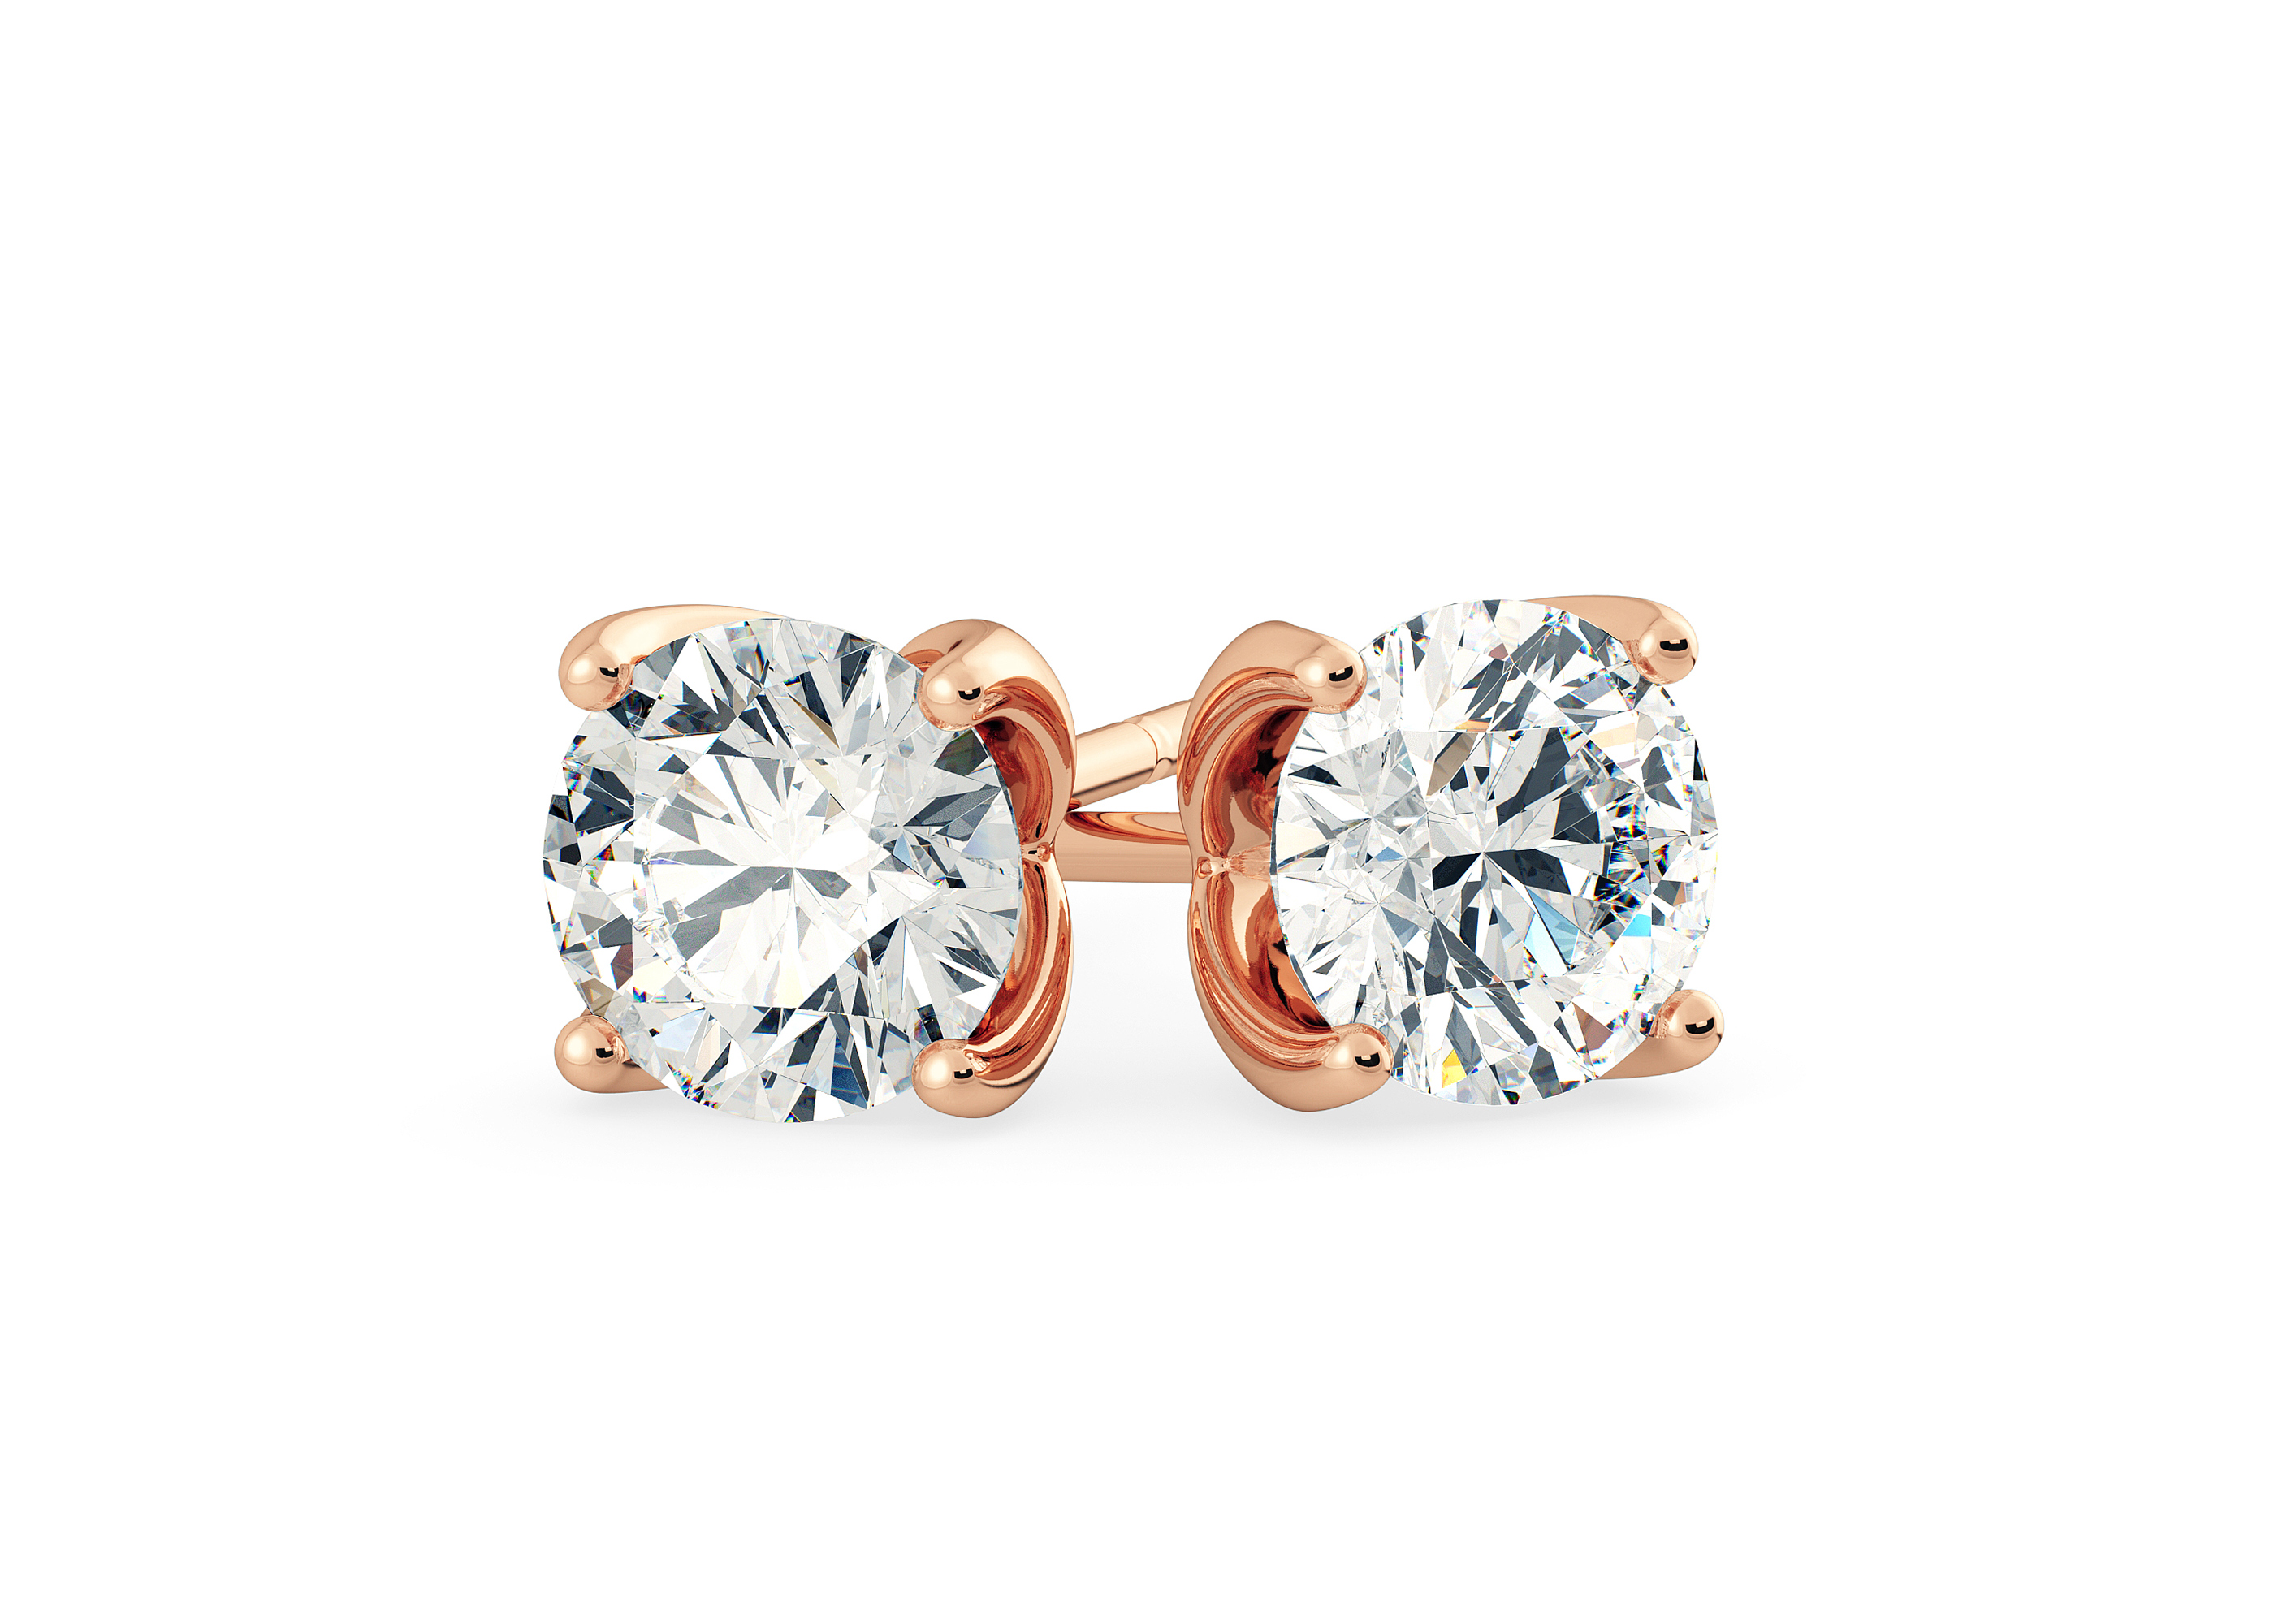 Mirabelle Round Brilliant Diamond Stud Earrings in 18K Rose Gold with Alpha Backs